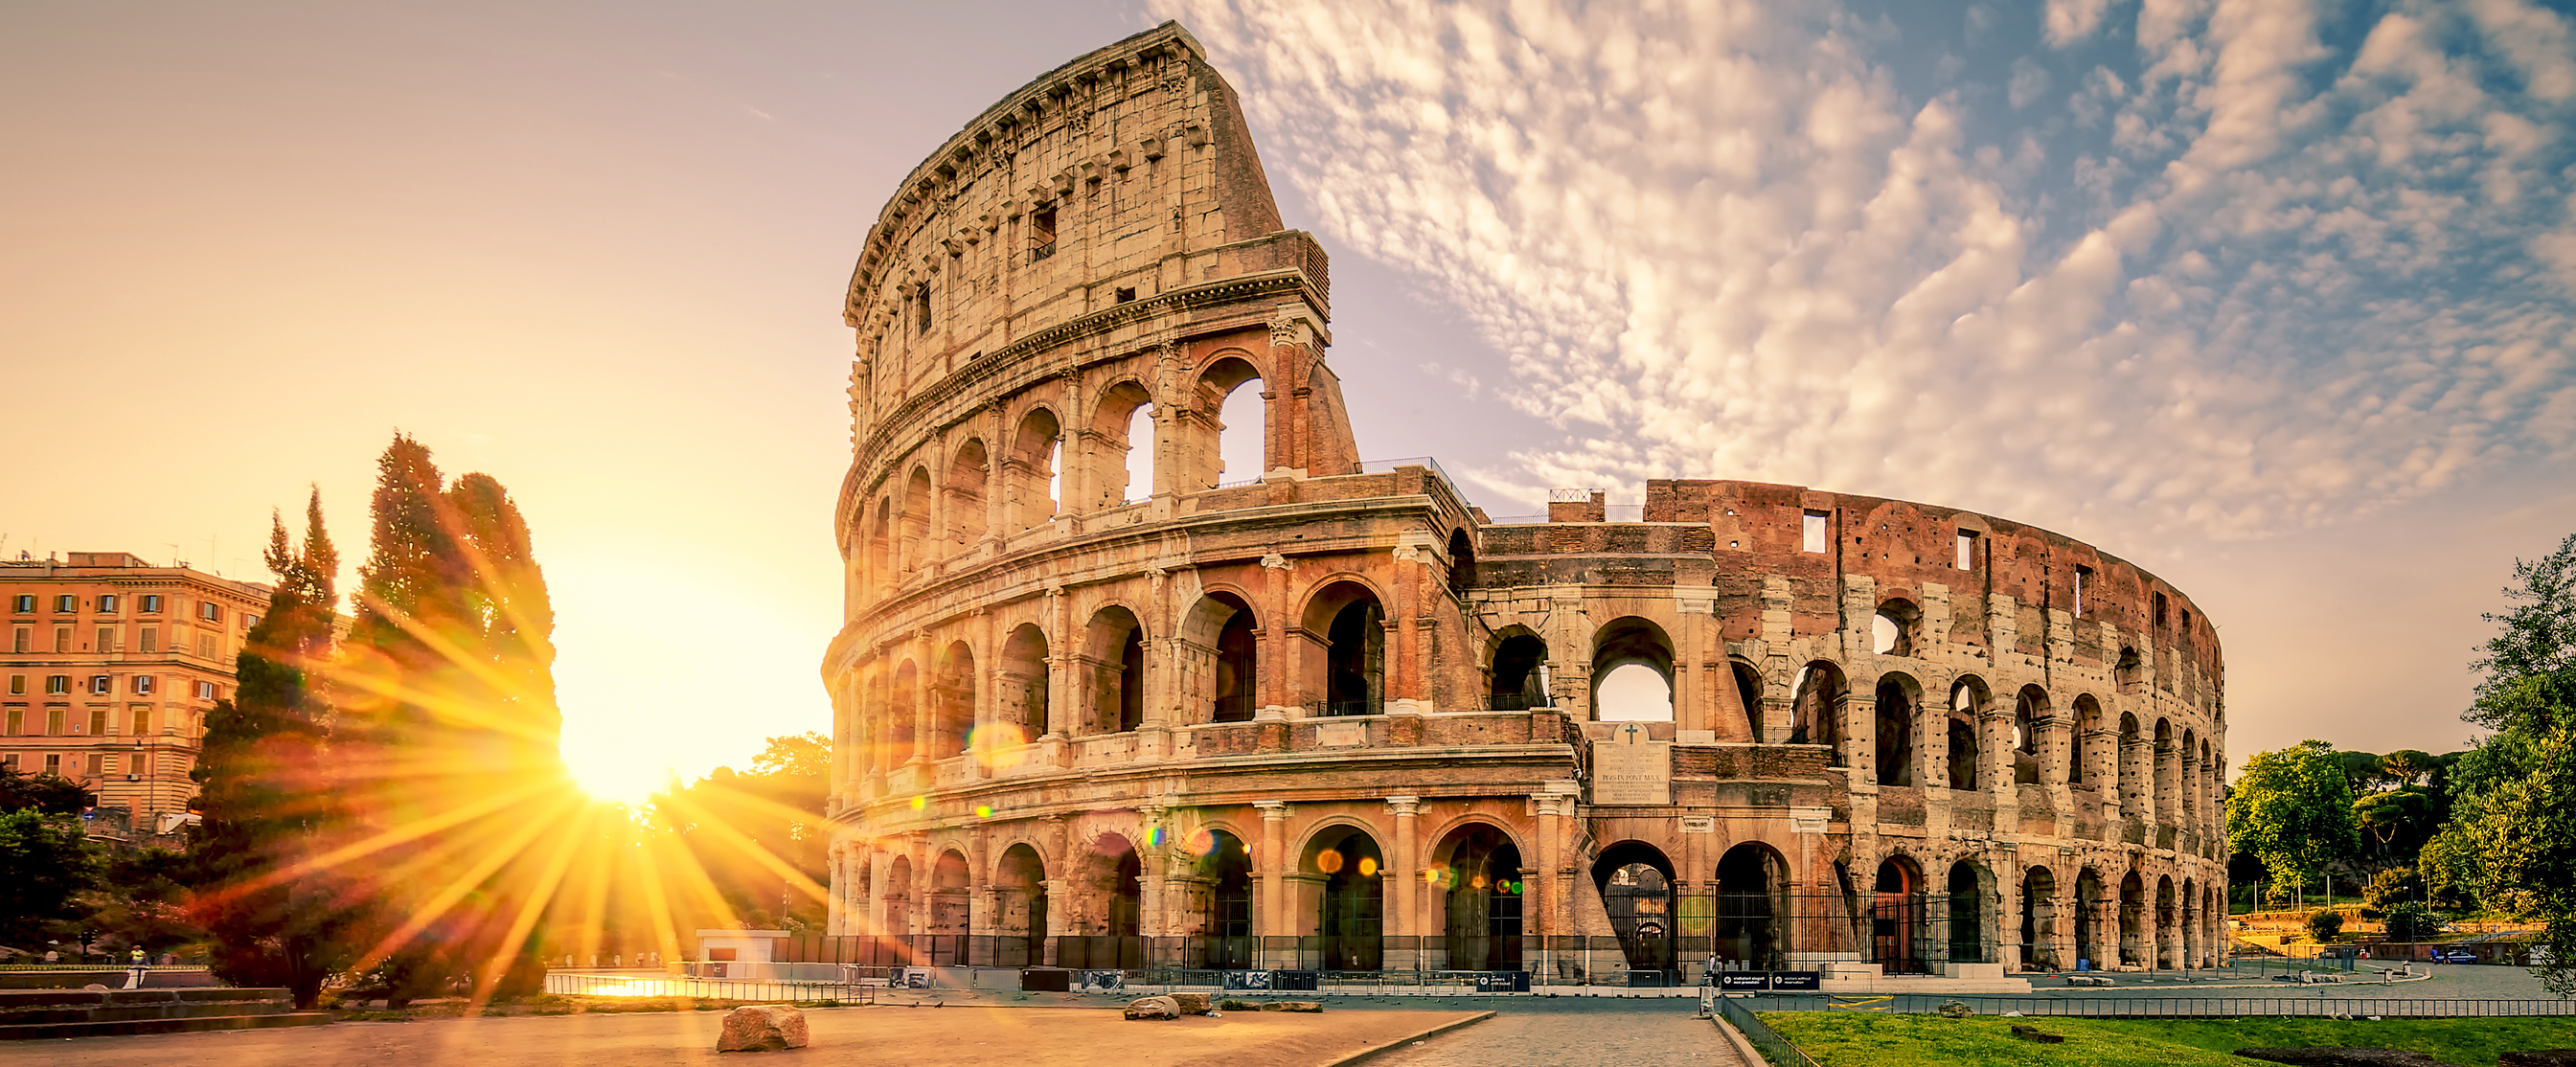 Round-trip flights to Rome in the $300s and $400s